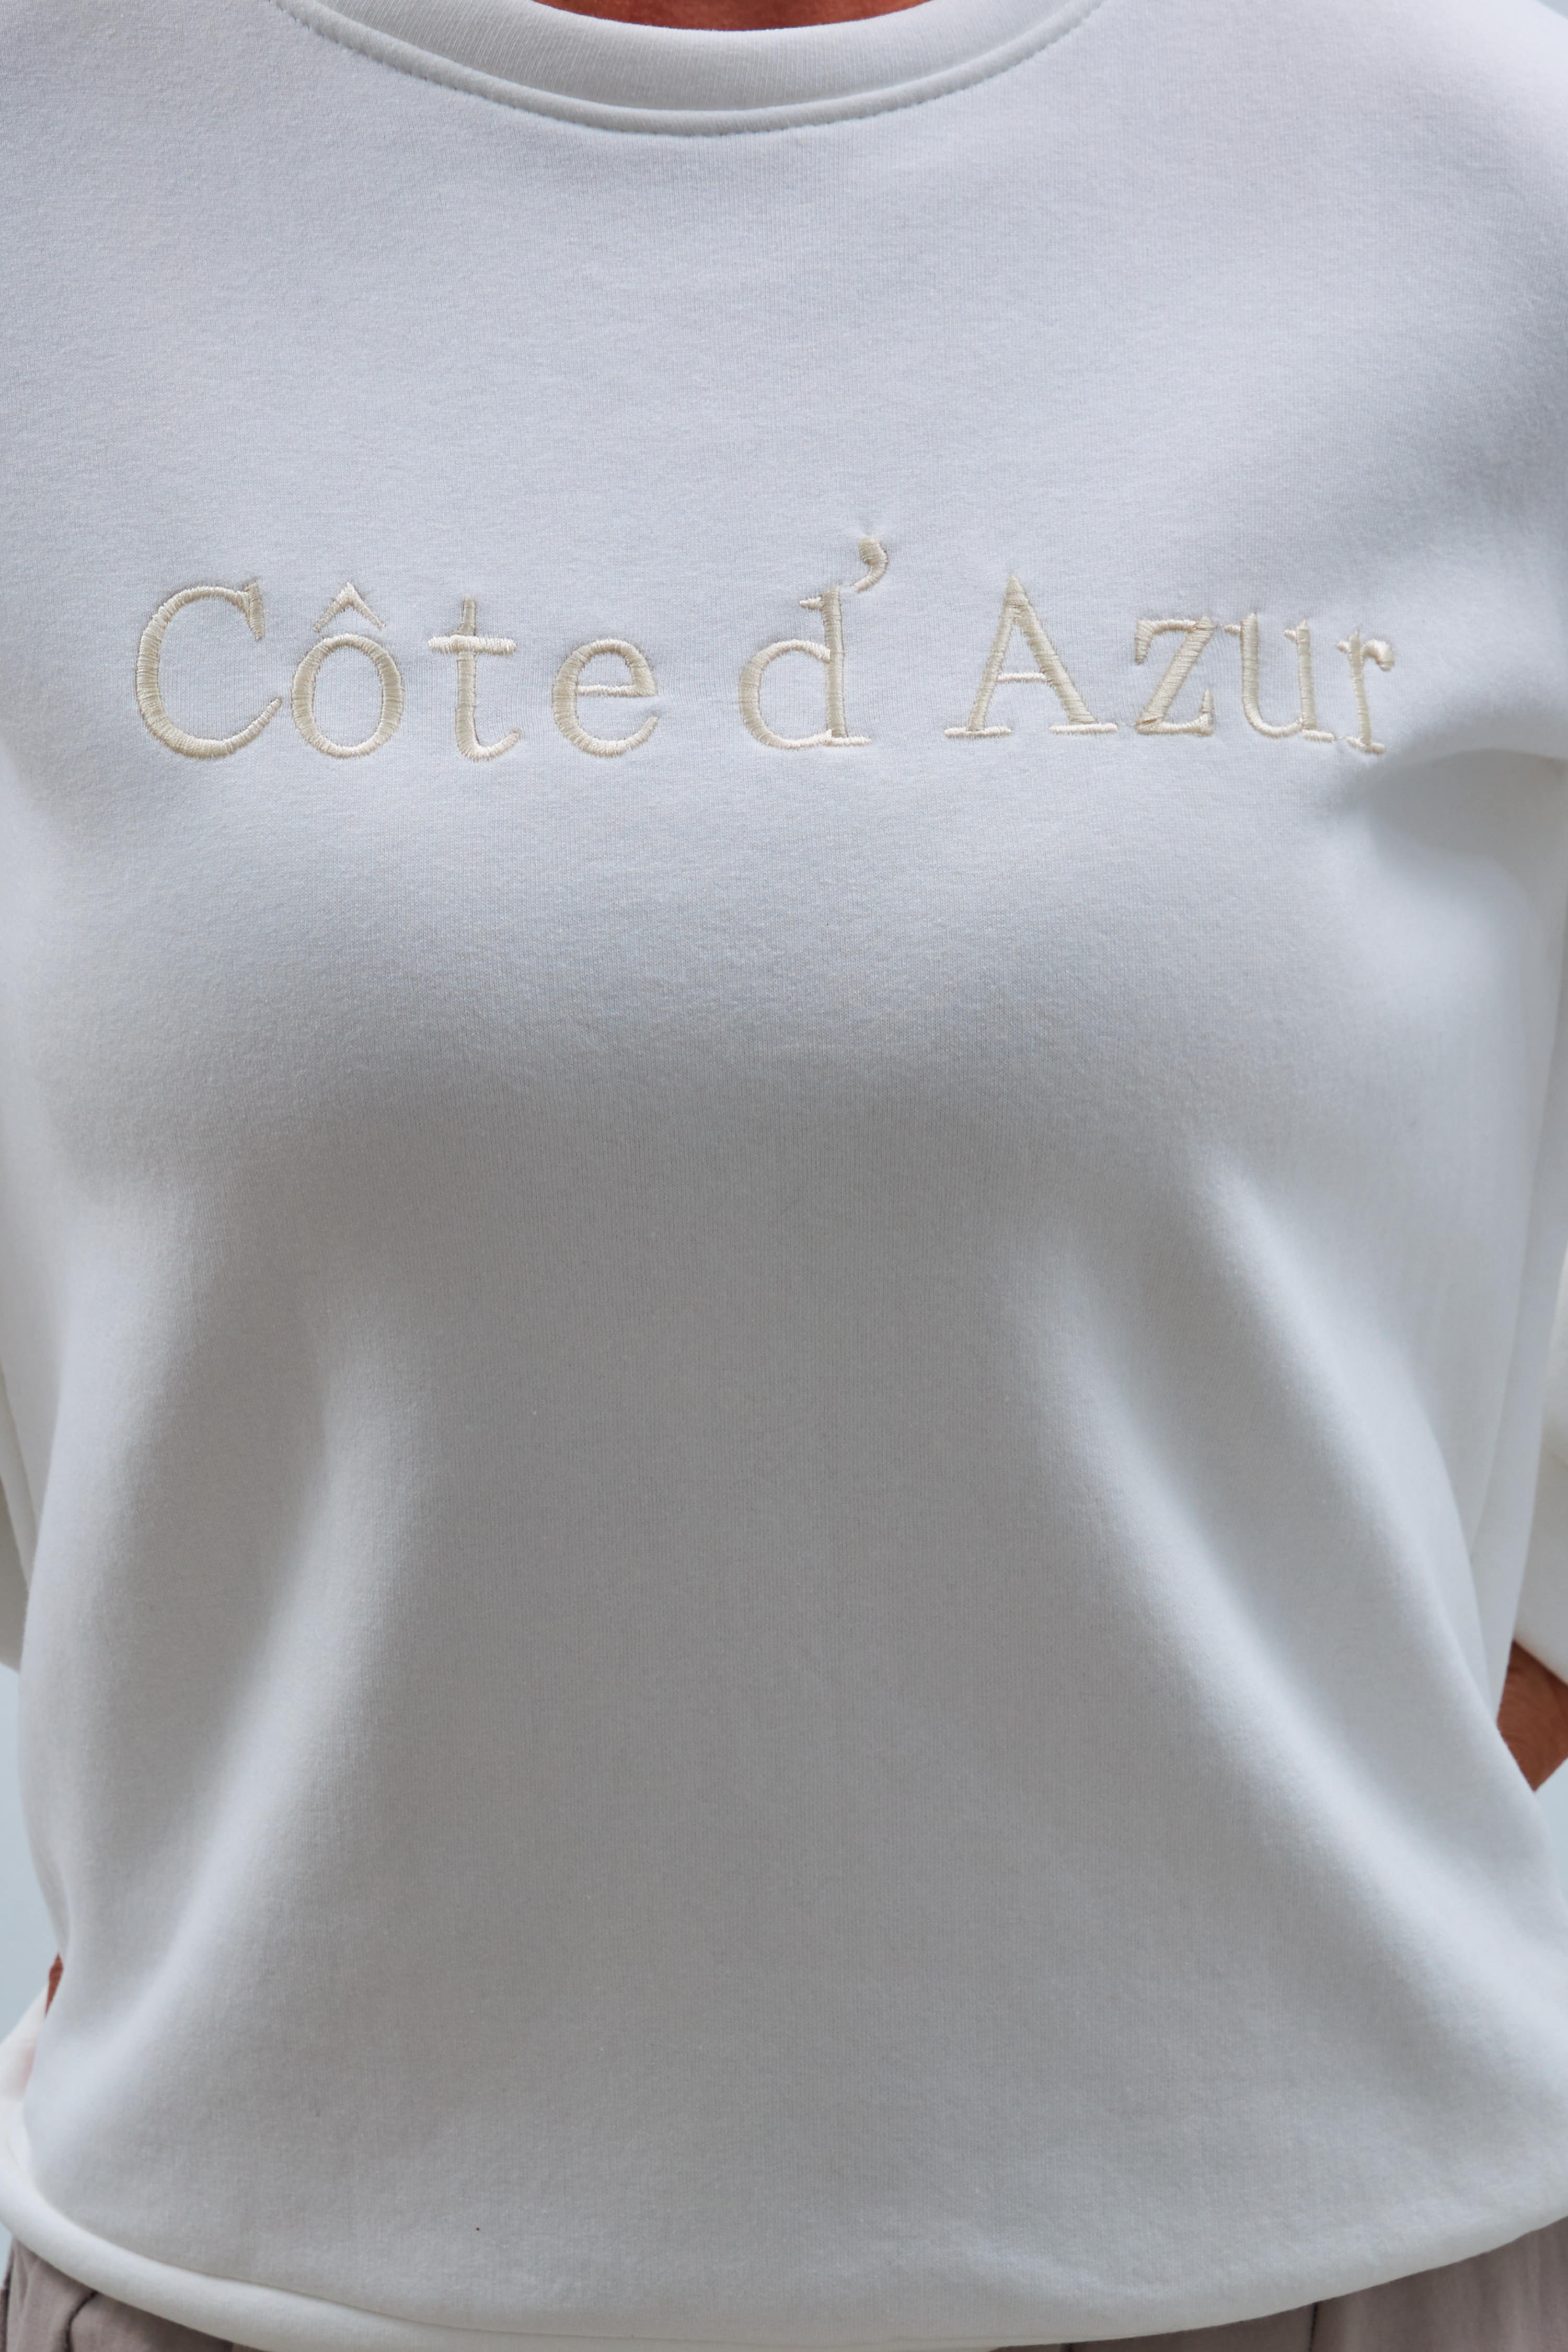 Sweaty with embroidered lettering "Cote d'Azur", ecru